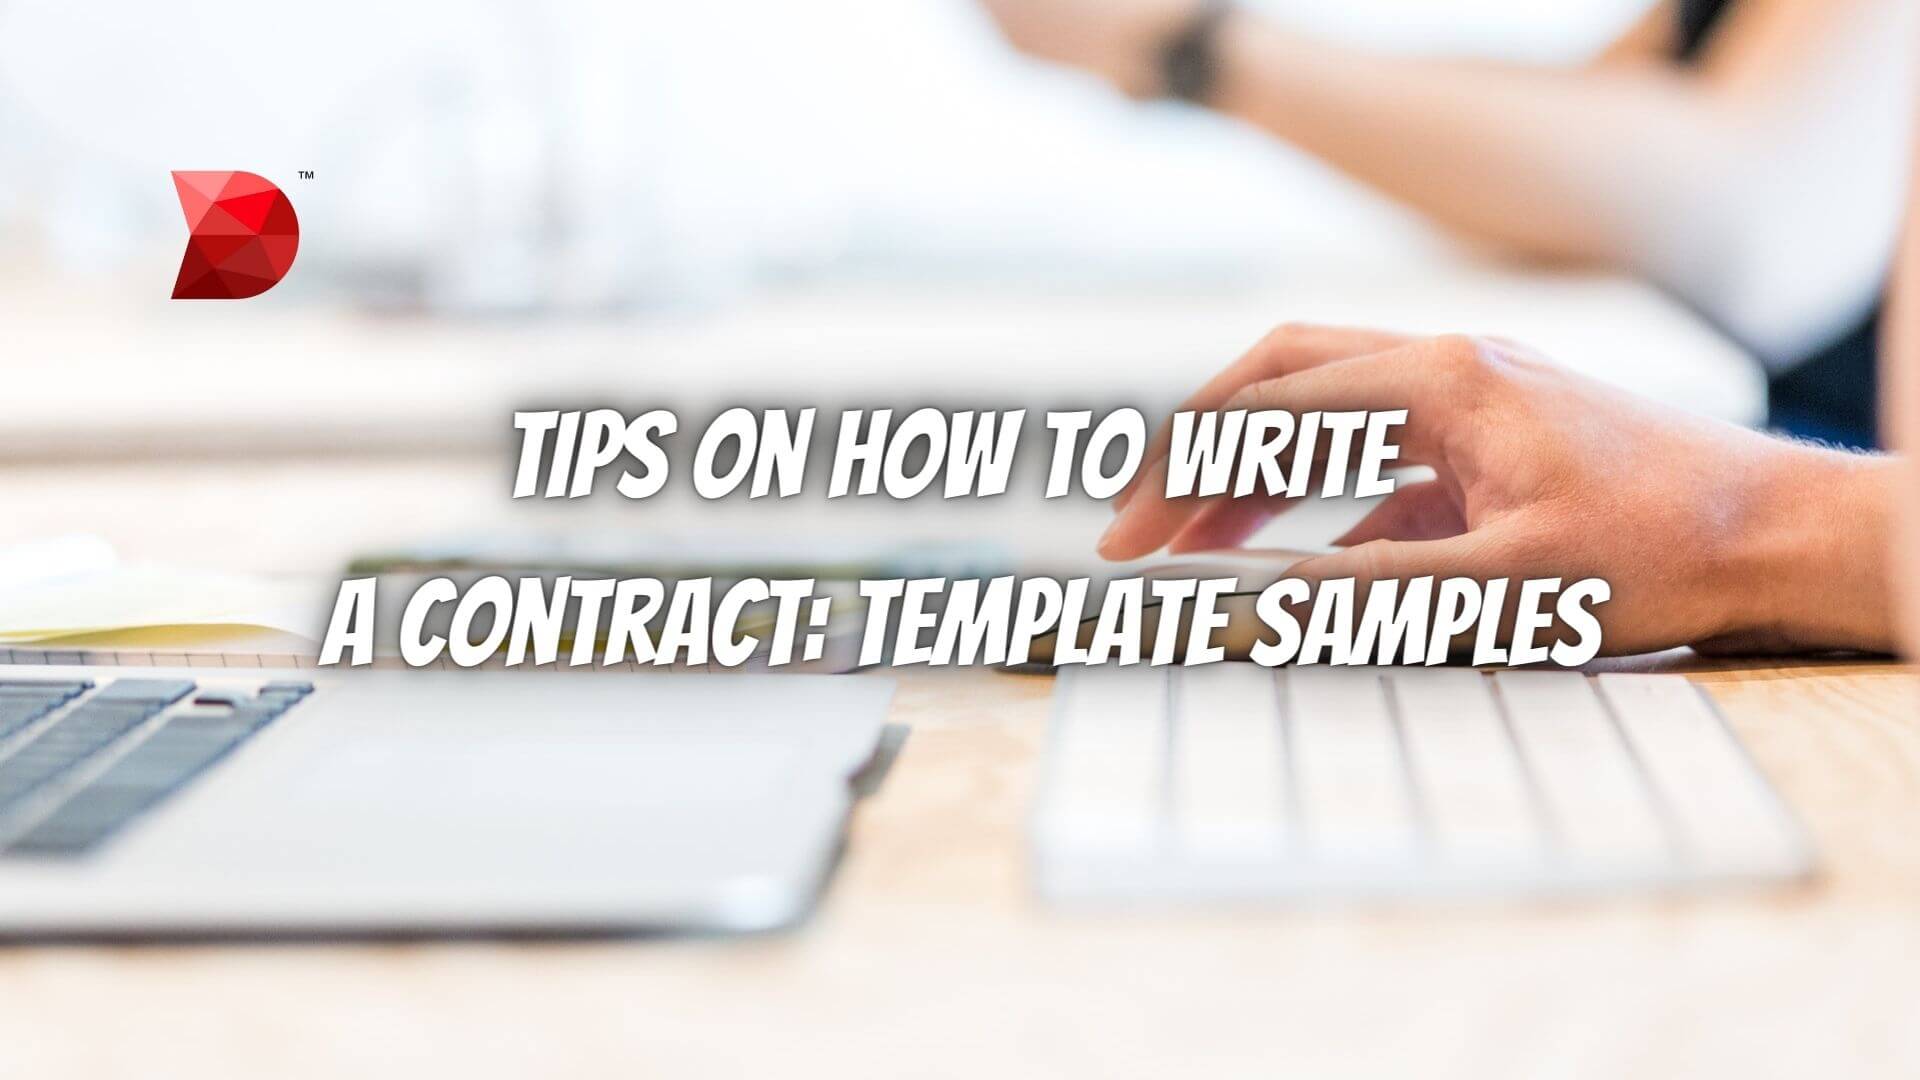 Tips on How to Write a Contract Template Samples